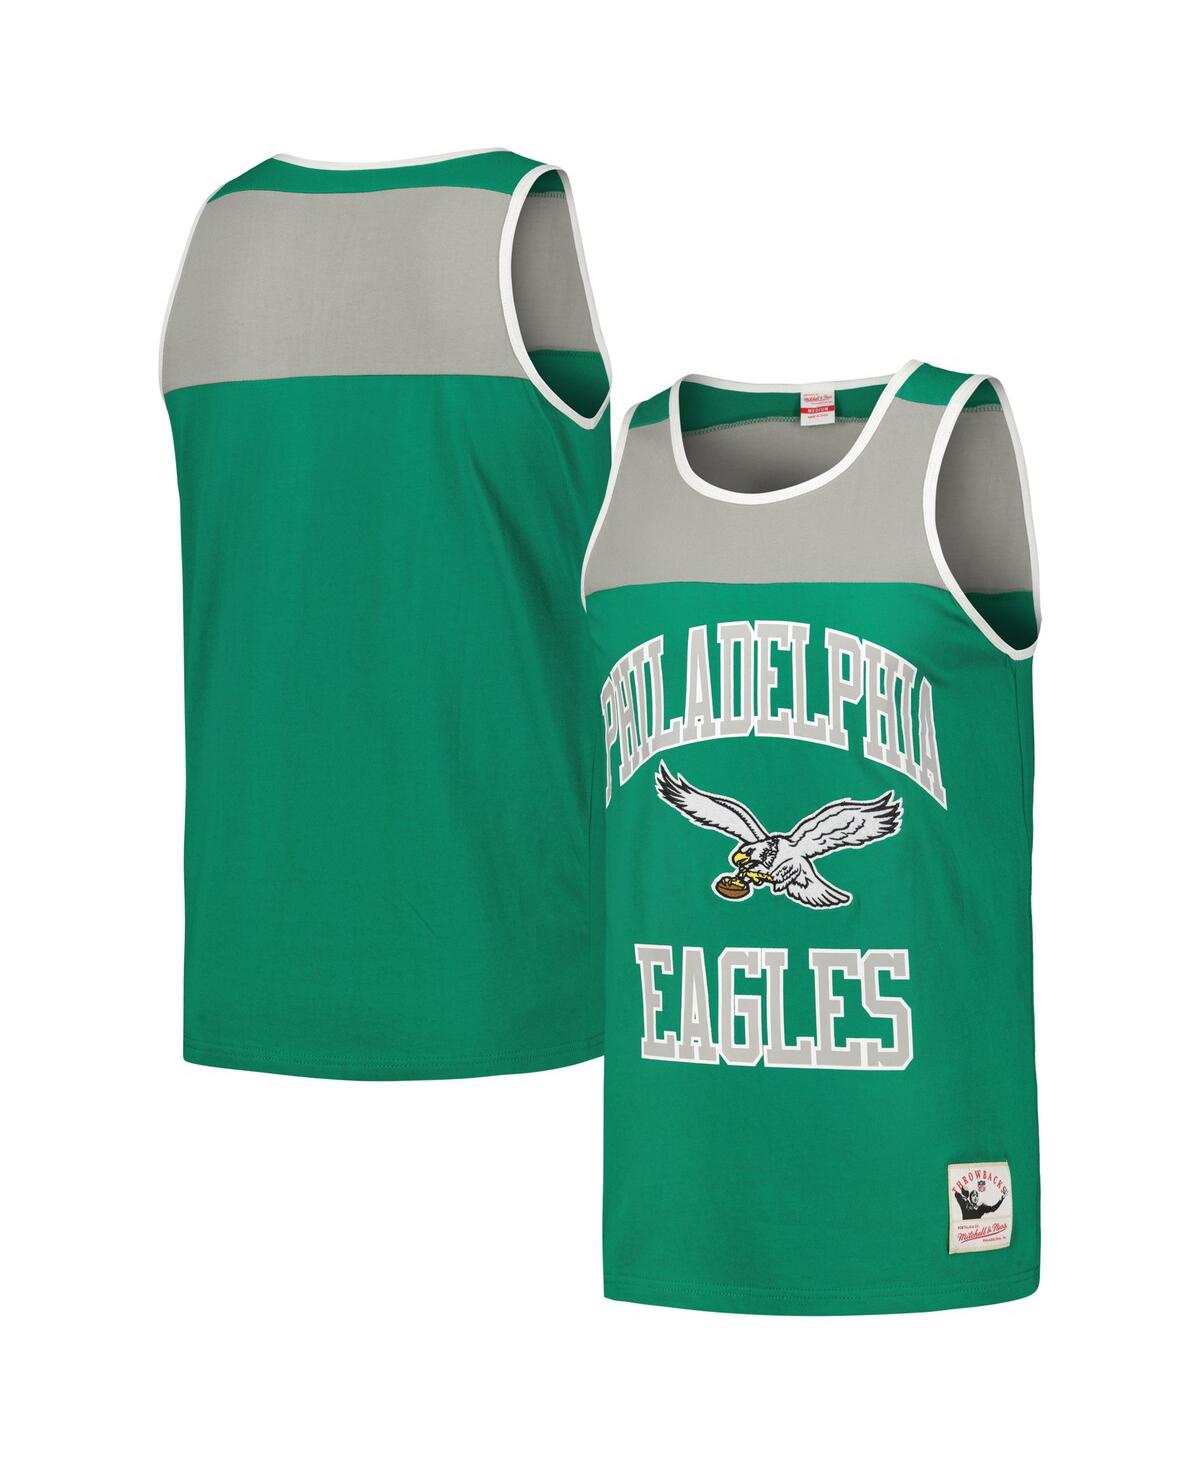 Men's Mitchell & Ness Kelly Green and Silver Philadelphia Eagles Heritage Colorblock Tank Top - Kelly Green, Silver